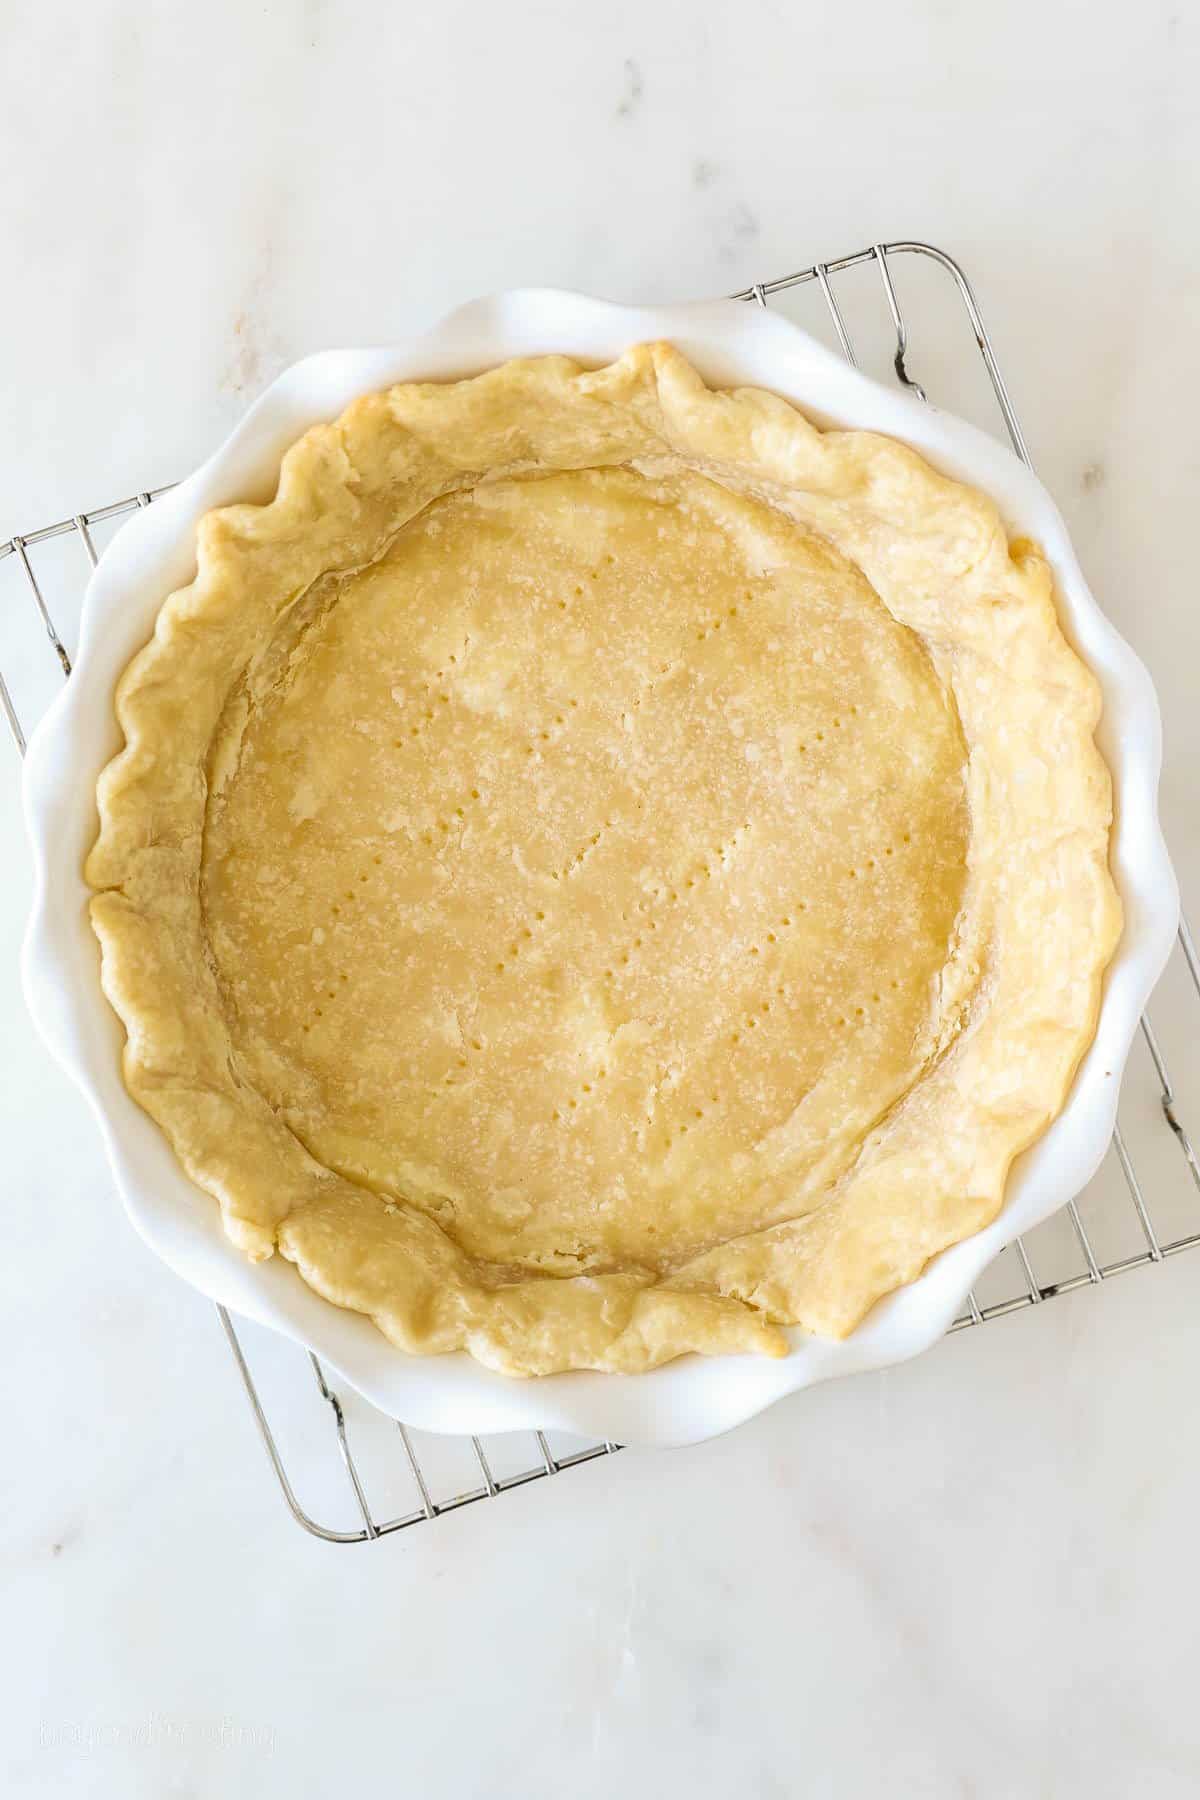 Overhead view of a partially baked pie crust